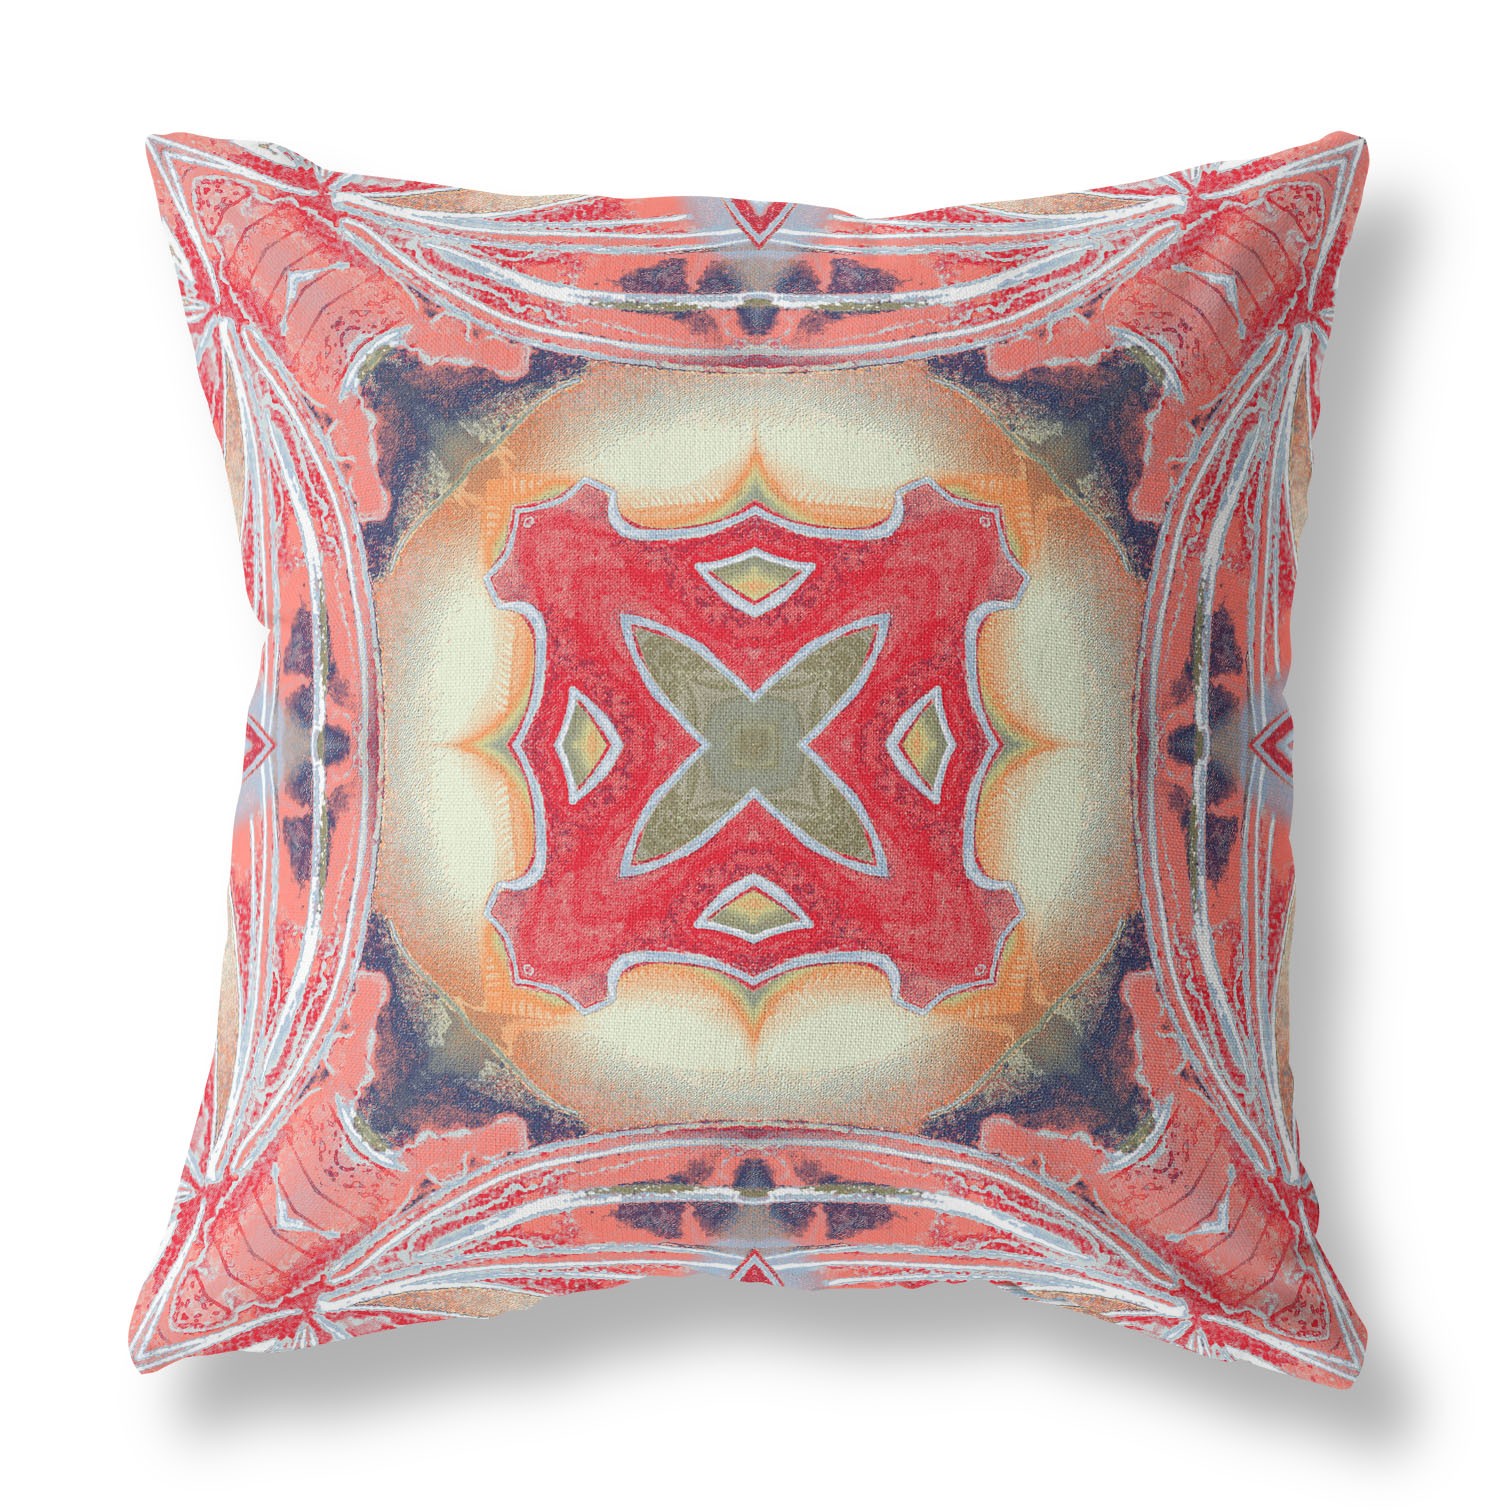 26"x26" Pink Peach Red Zippered Broadcloth Geometric Throw Pillow-417635-1